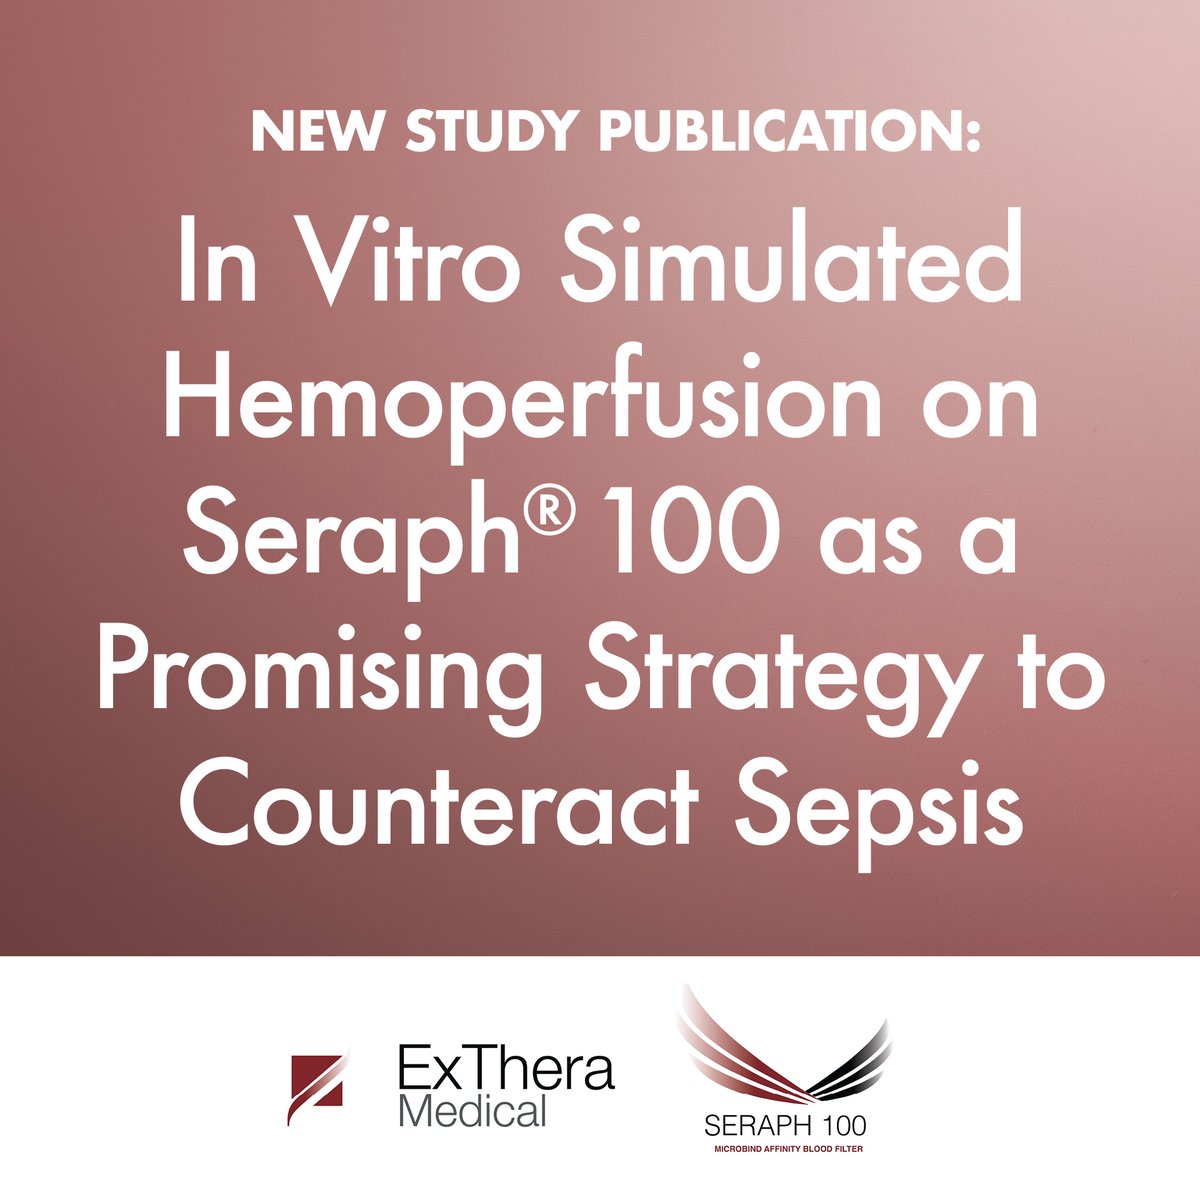 “Seraph®-100 adsorbed three bacteria from a super-infected solution during an in vitro simulated hemoperfusion session, suggesting a new era in treating bloodstream infections caused by several pathogens, often inducing sepsis.” @MDPIOpenAccess extheramedical.com/publications/